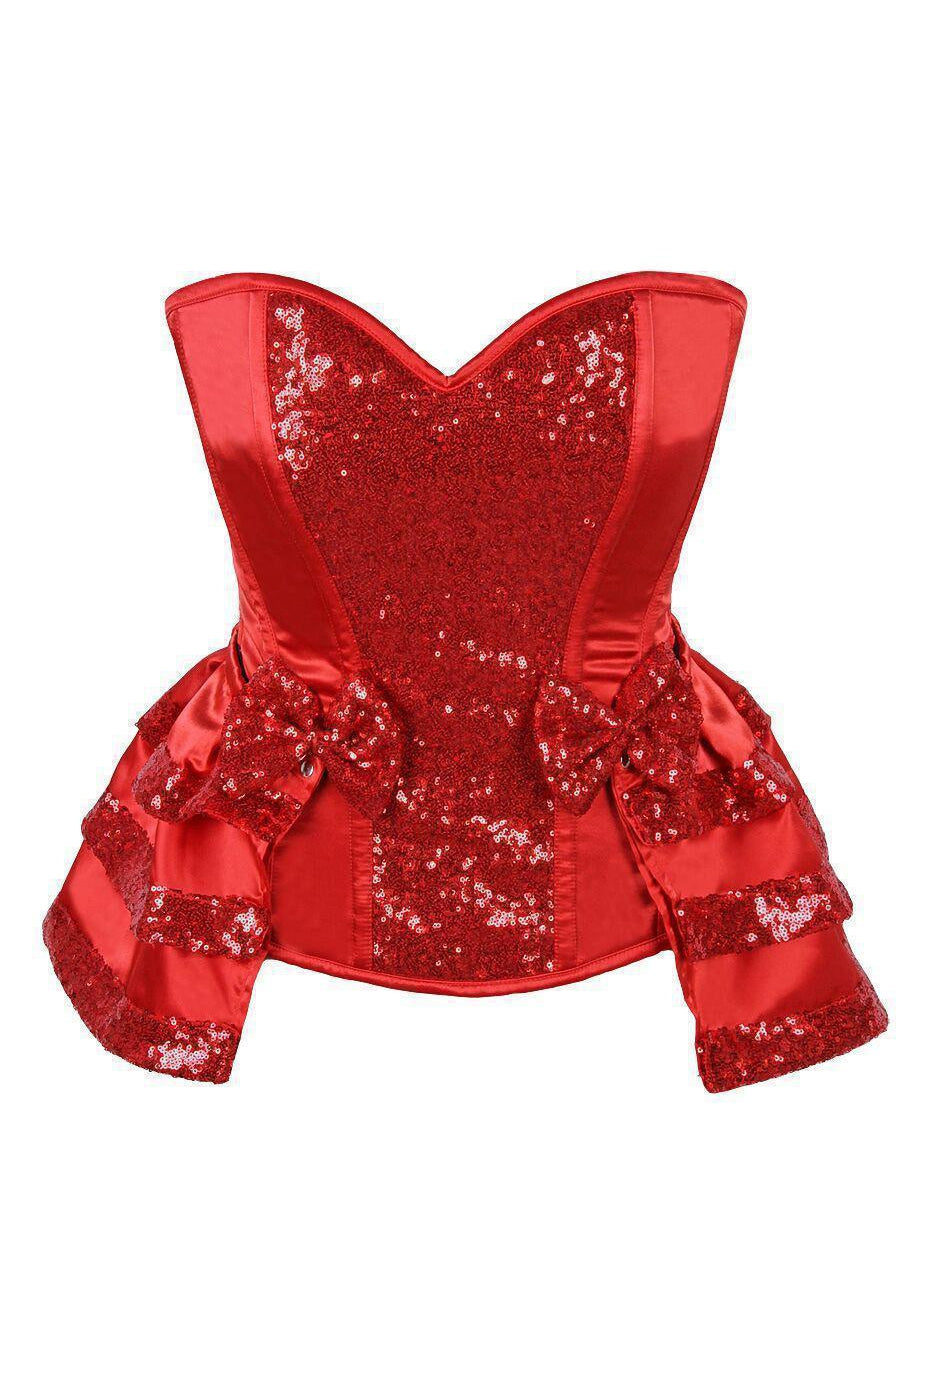 Top Drawer Red Satin & Sequin Steel Boned Corset w/Removable Snap Skirt-Daisy Corsets-SEXYSHOES.COM